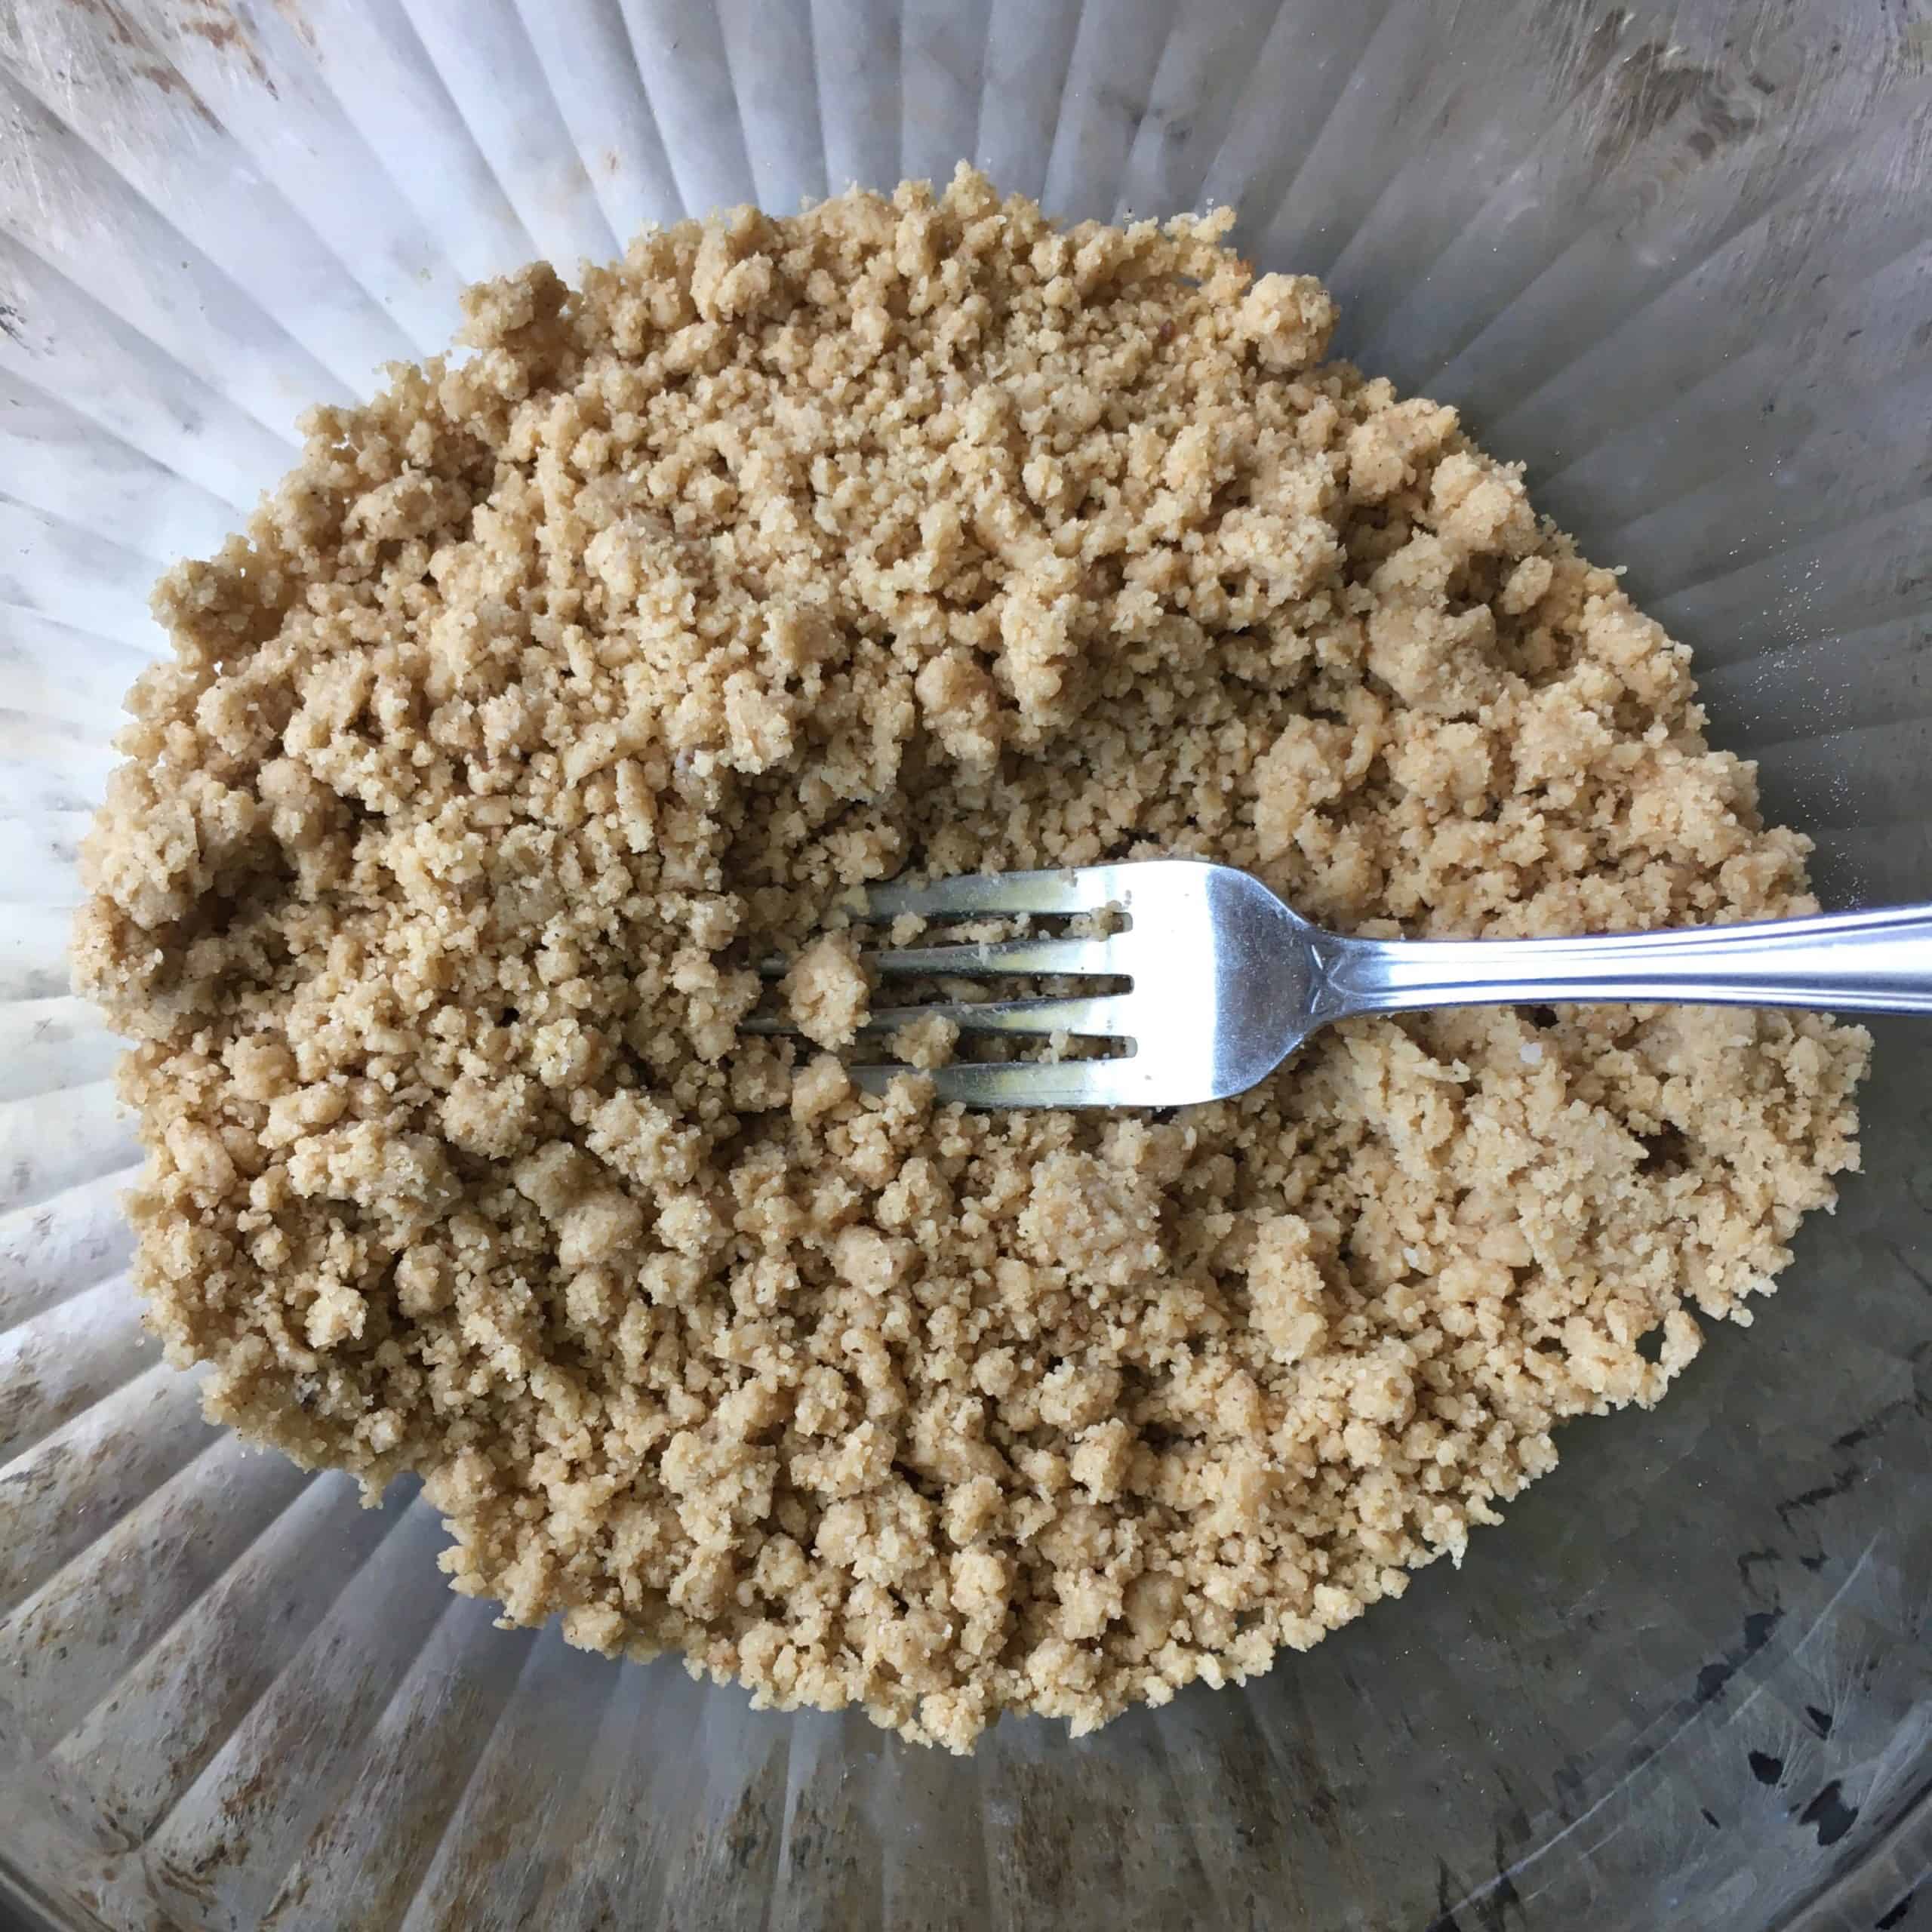 homemade streusel topping just mixed together using a fork